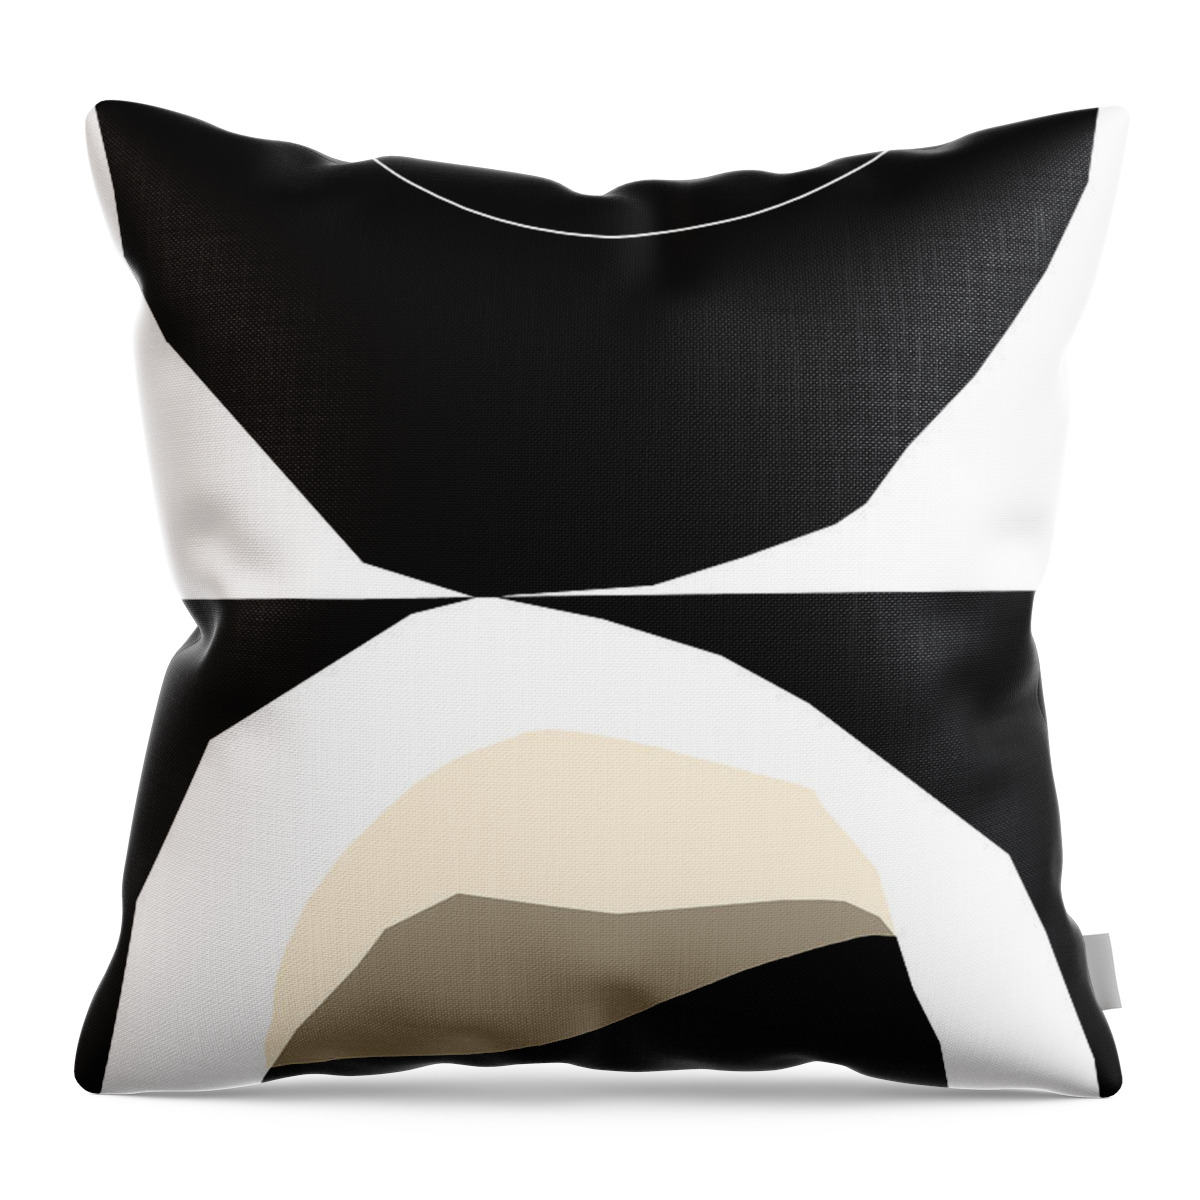 Black Throw Pillow featuring the digital art 0002-Fulfilled by Anke Classen